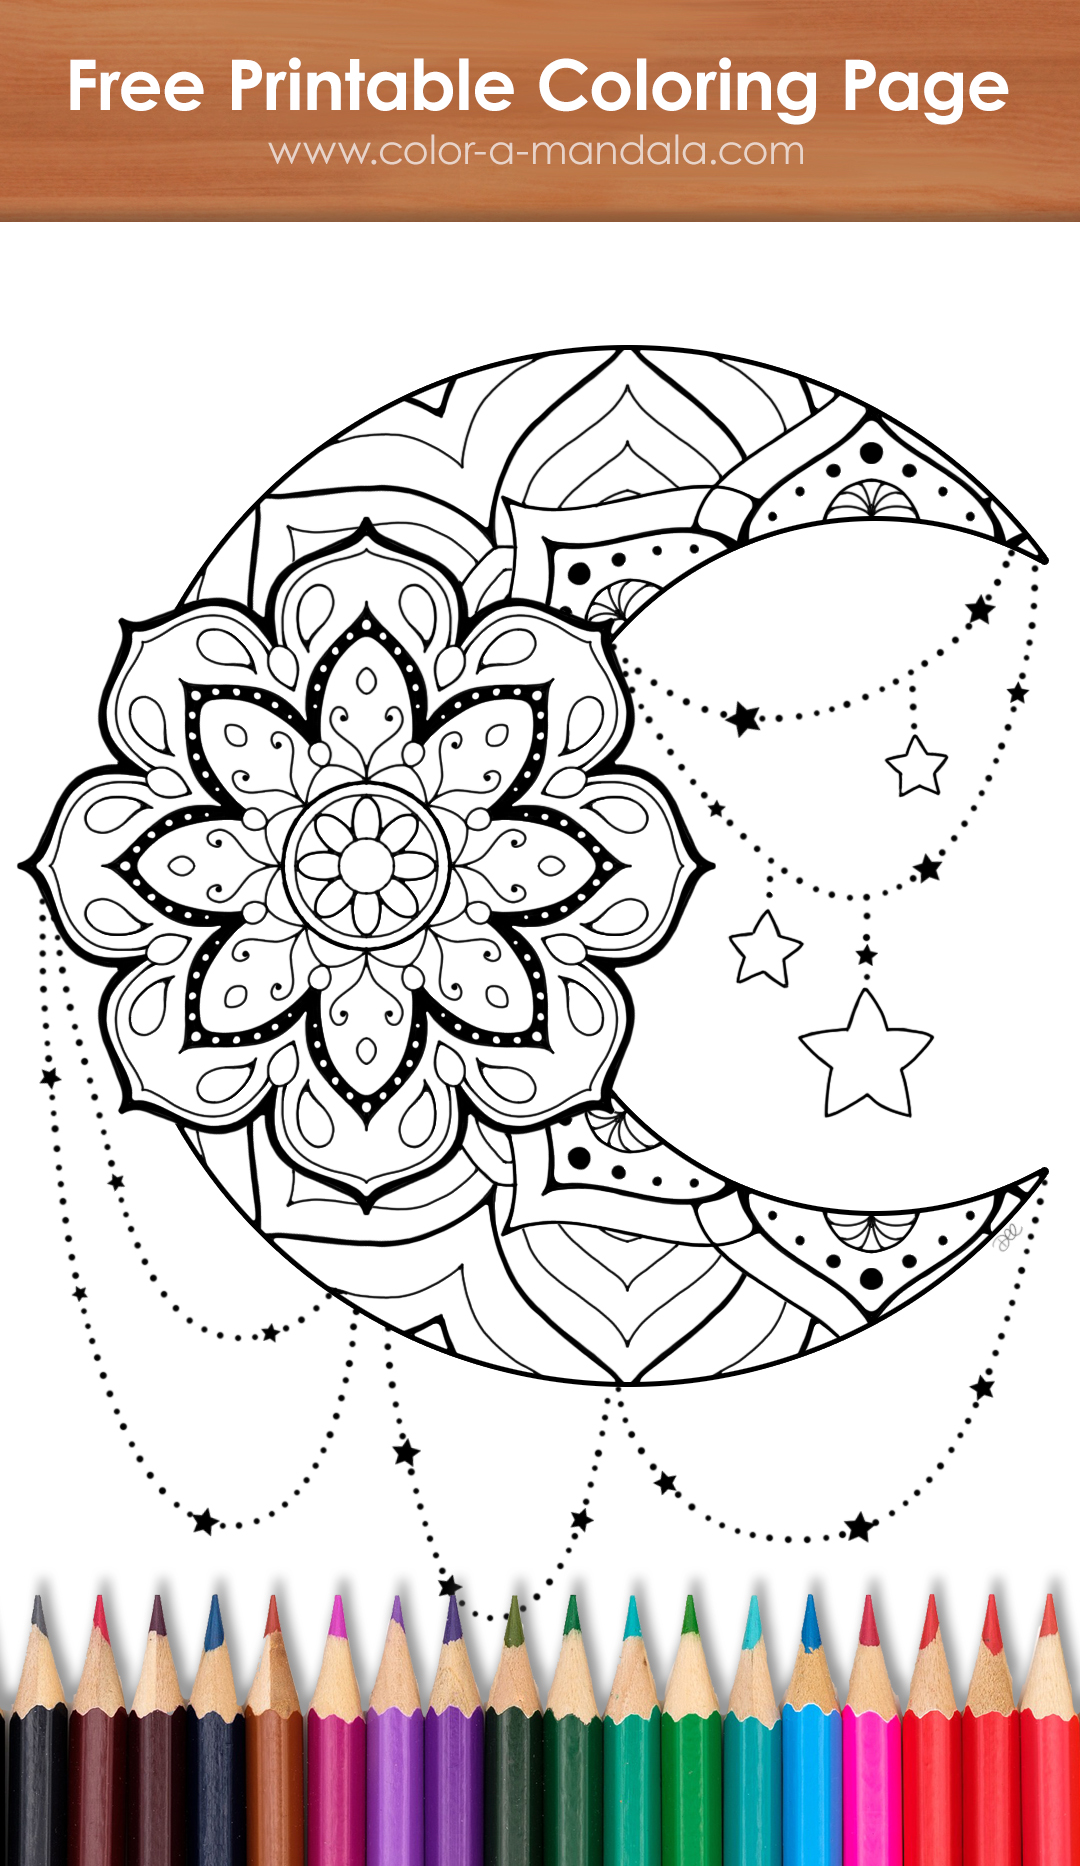 Image of an uncolored coloring page with a moon mandala illustration on it.